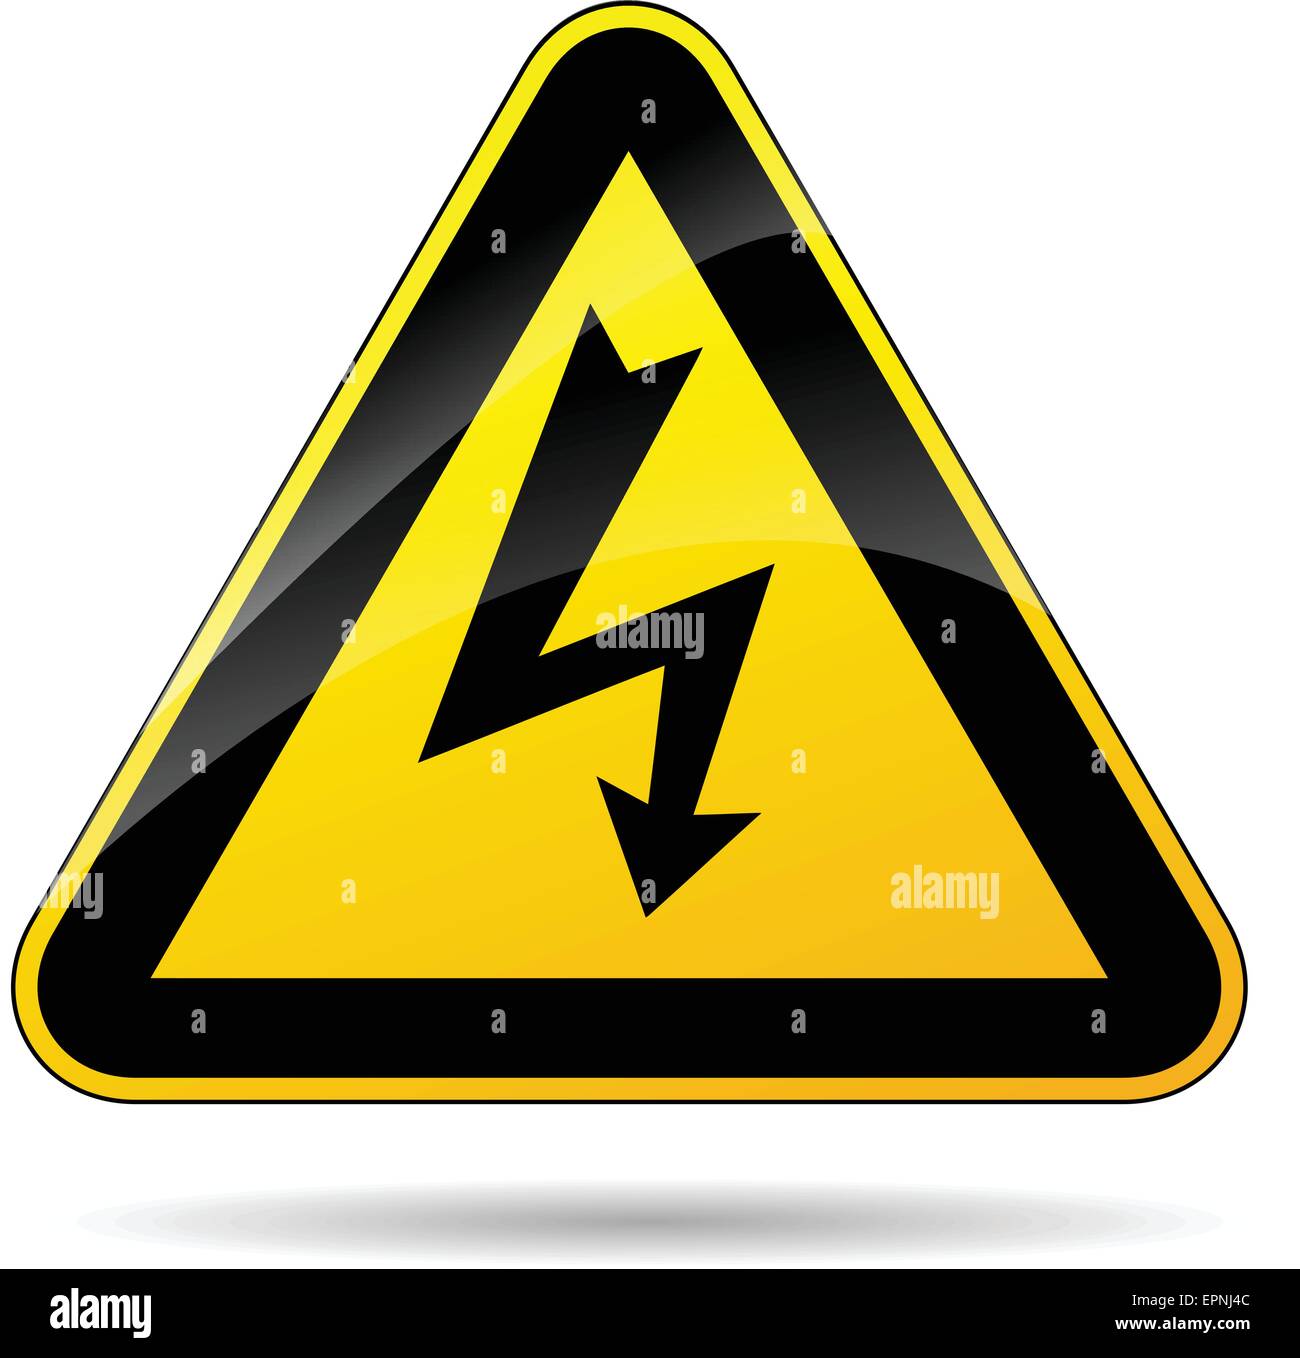 illustration of yellow triangle sign for electricity Stock Vector